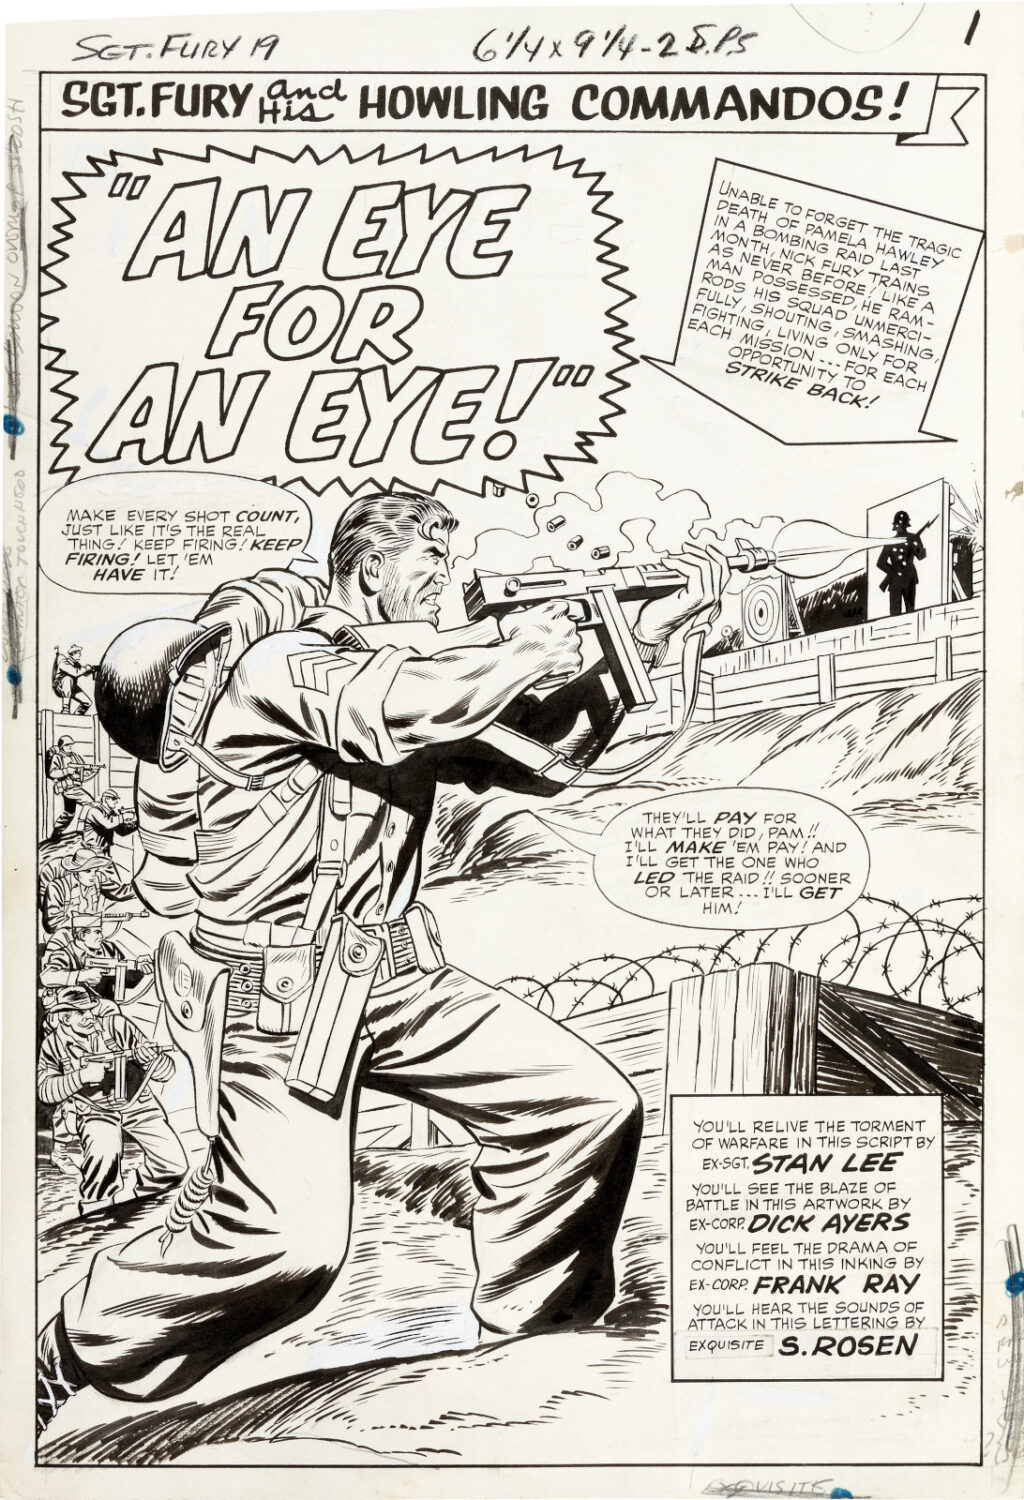 Sgt. Fury and His Howling Commandos issue 19 page 1 by Dick Ayers and Frank Giacoia